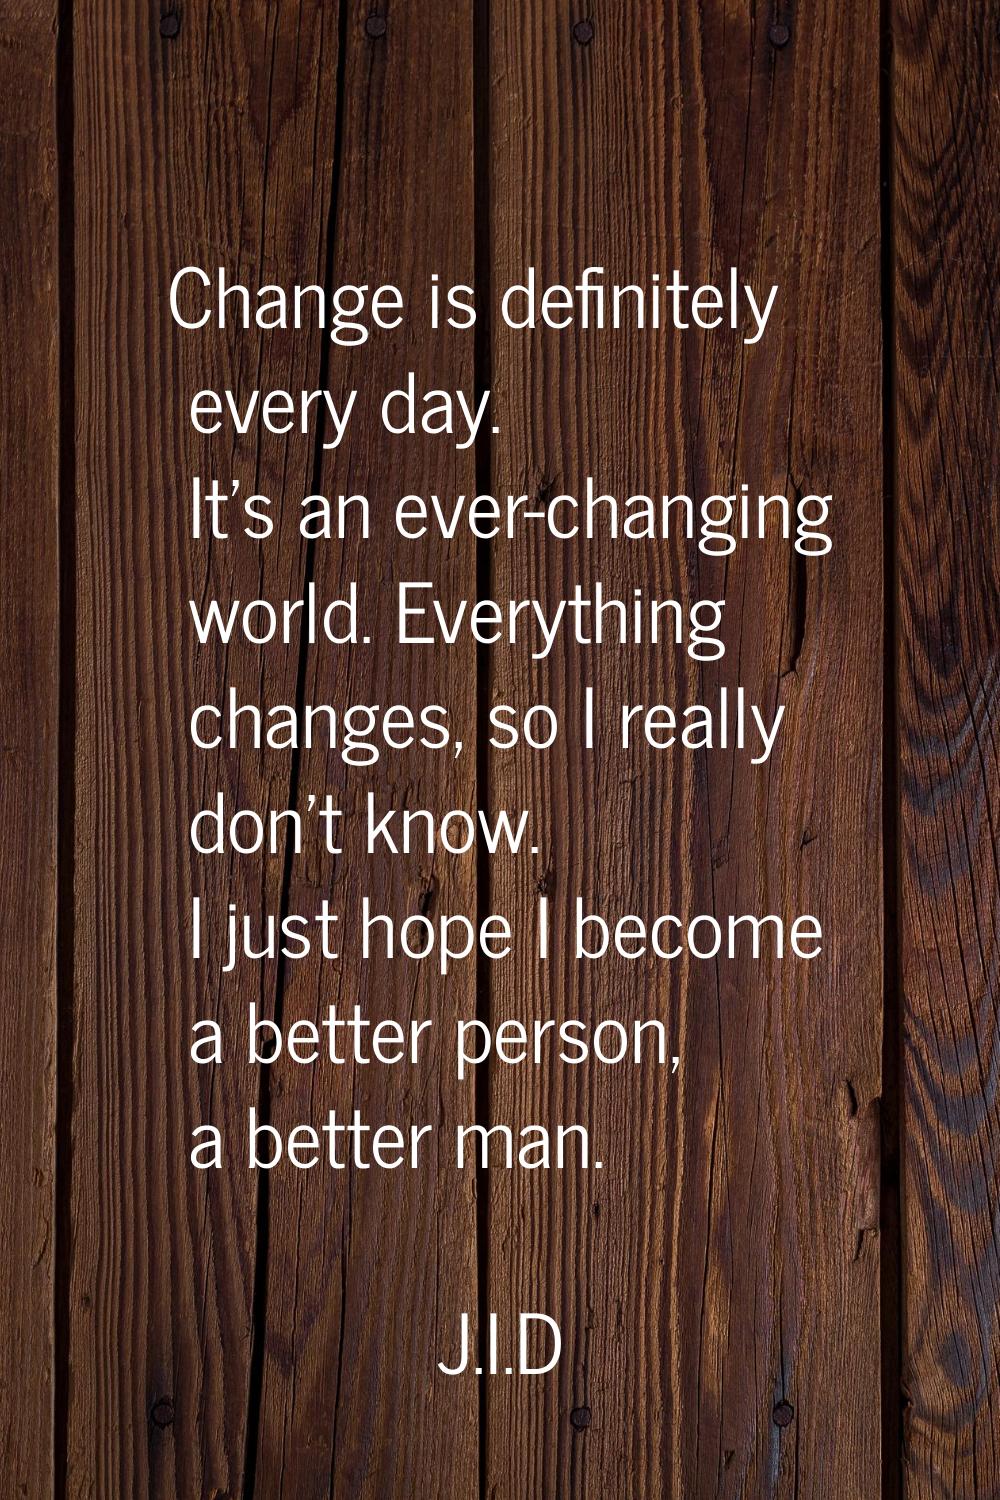 Change is definitely every day. It's an ever-changing world. Everything changes, so I really don't 